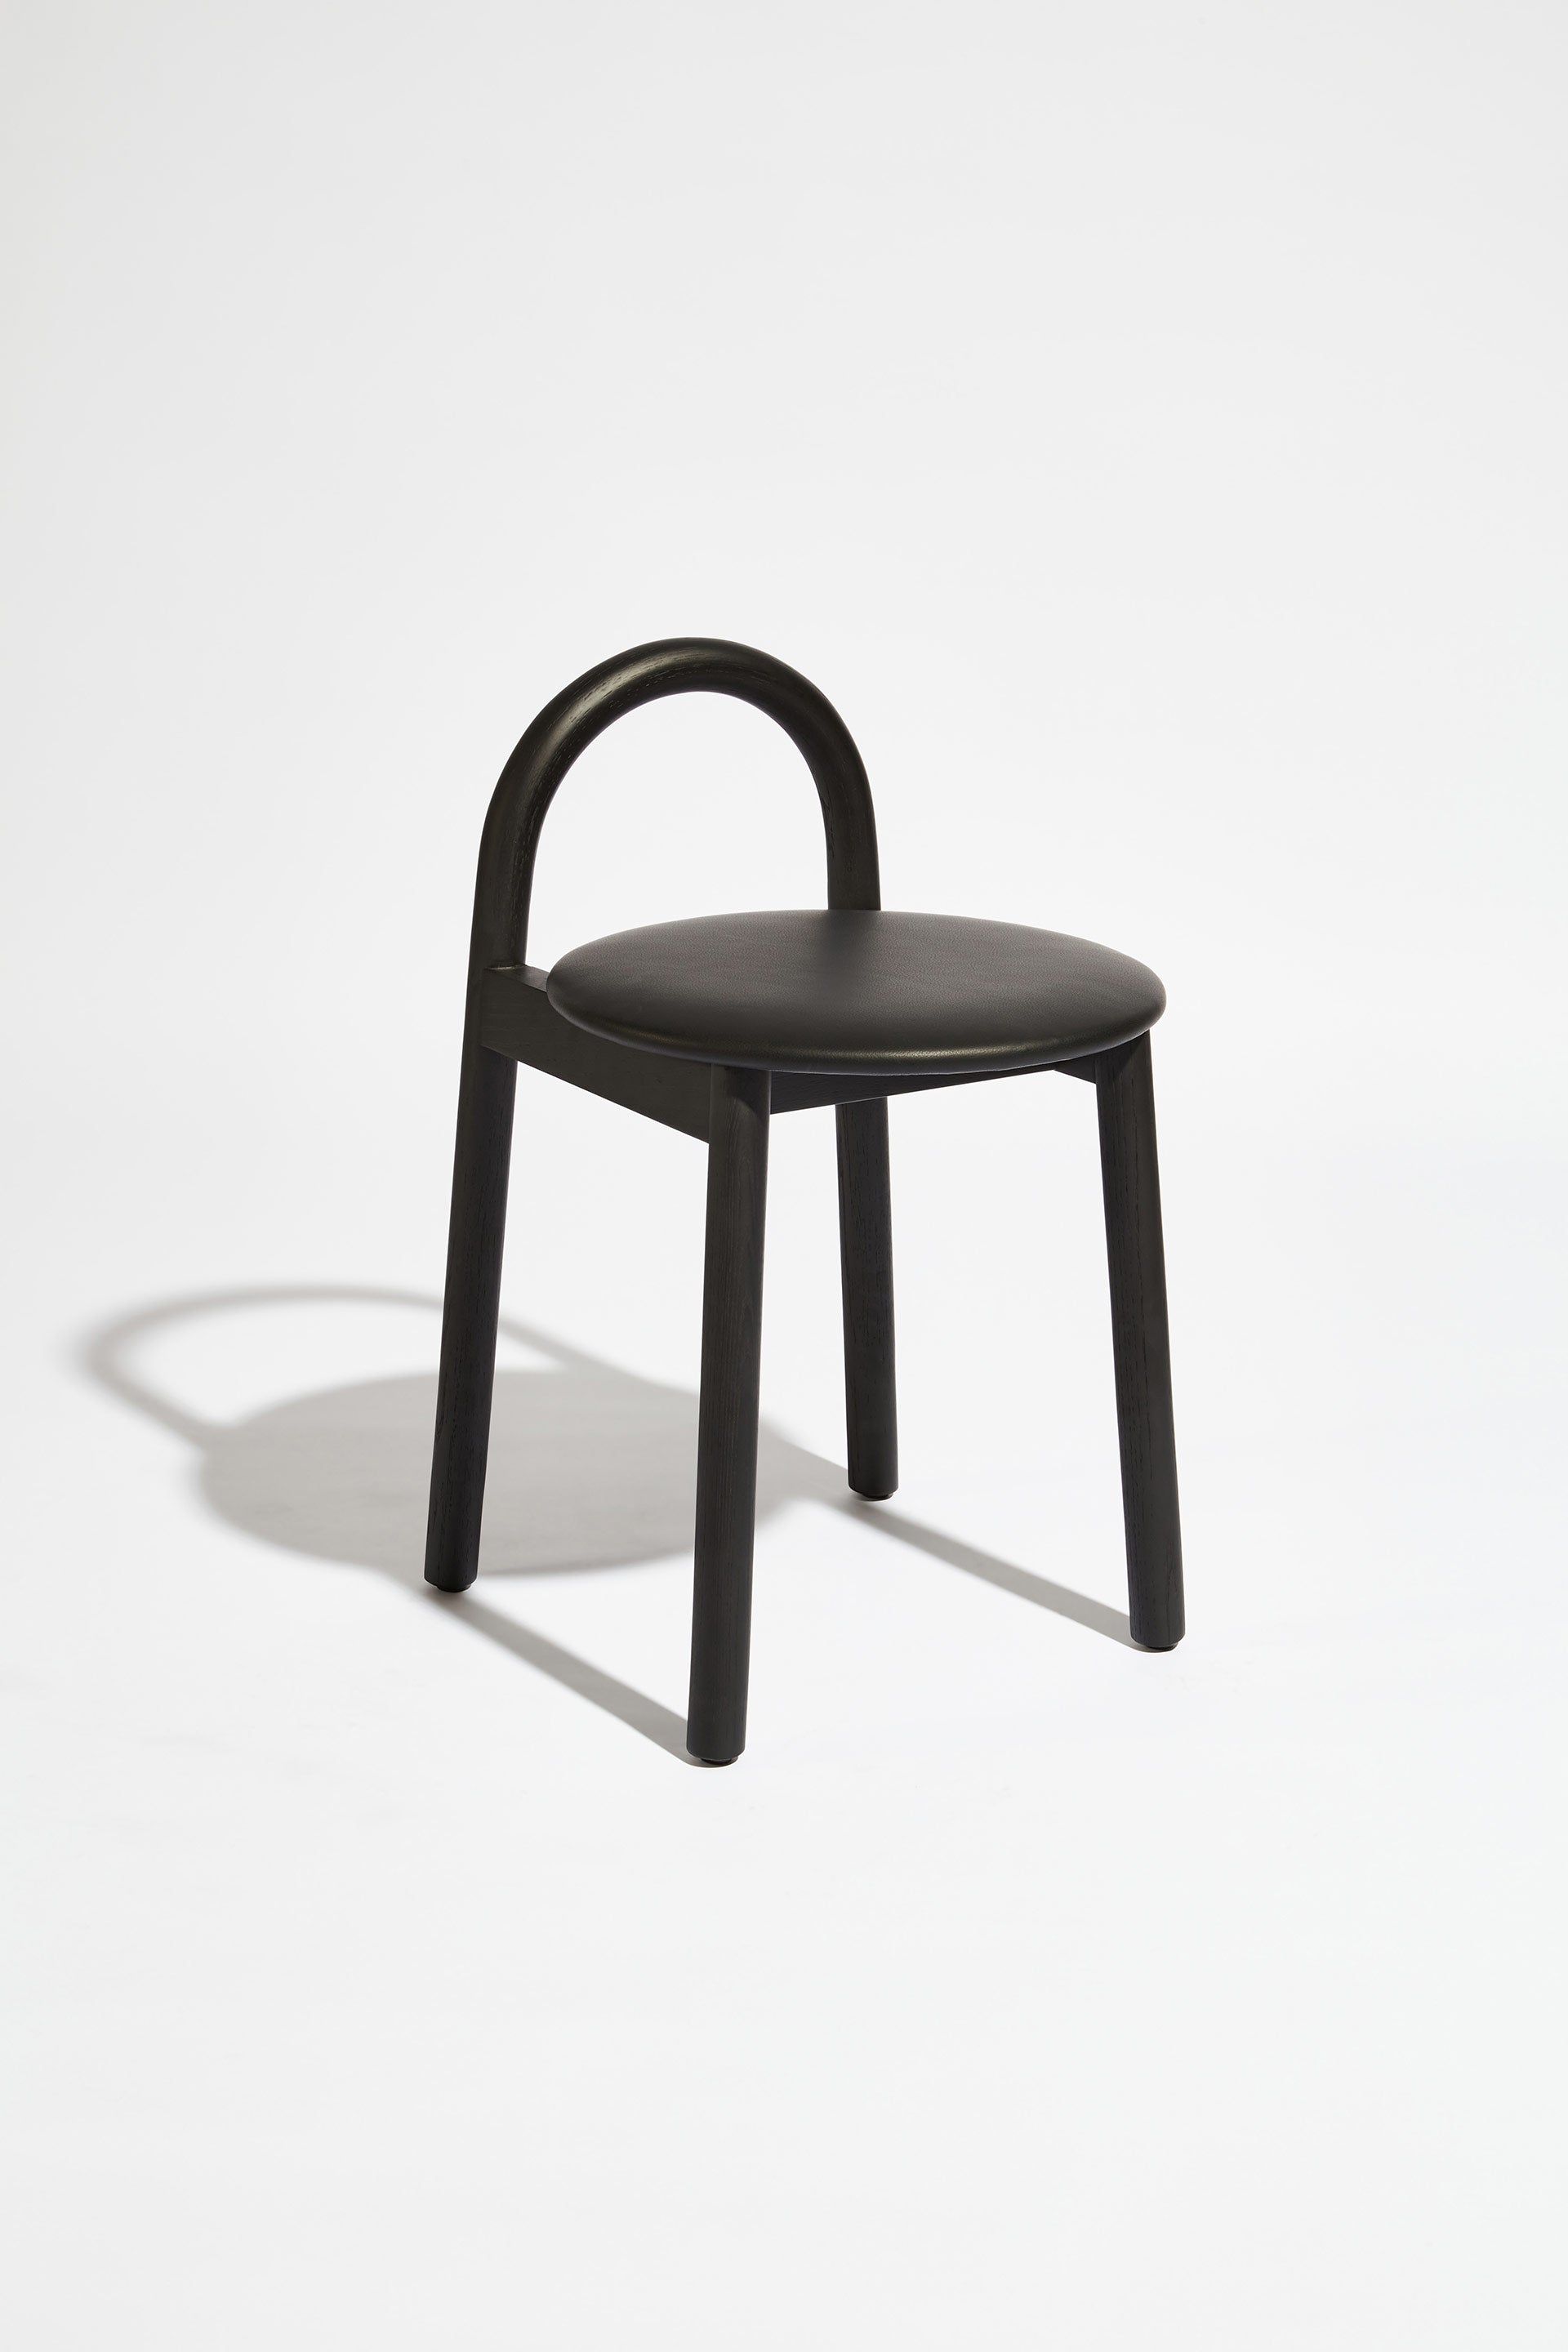 Bobby Timber Low Stool with leather seat pad | DesignByThem ** HF2 Lariat - Black or HL1 Primary - Black / Black Stained Ash